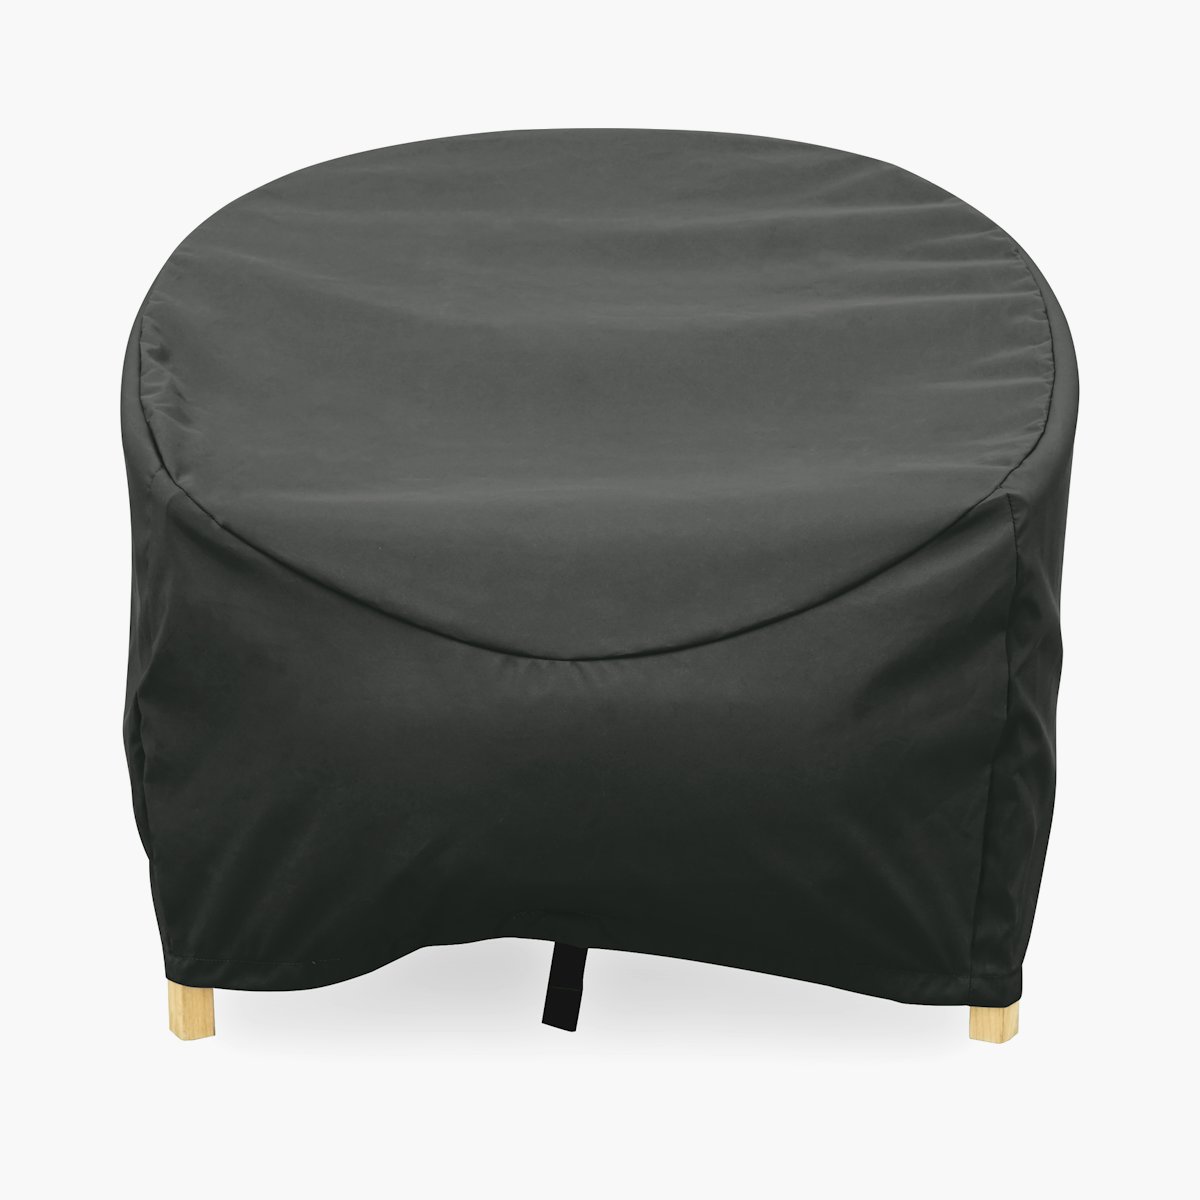 Softlands Outdoor Lounge Chair Cover